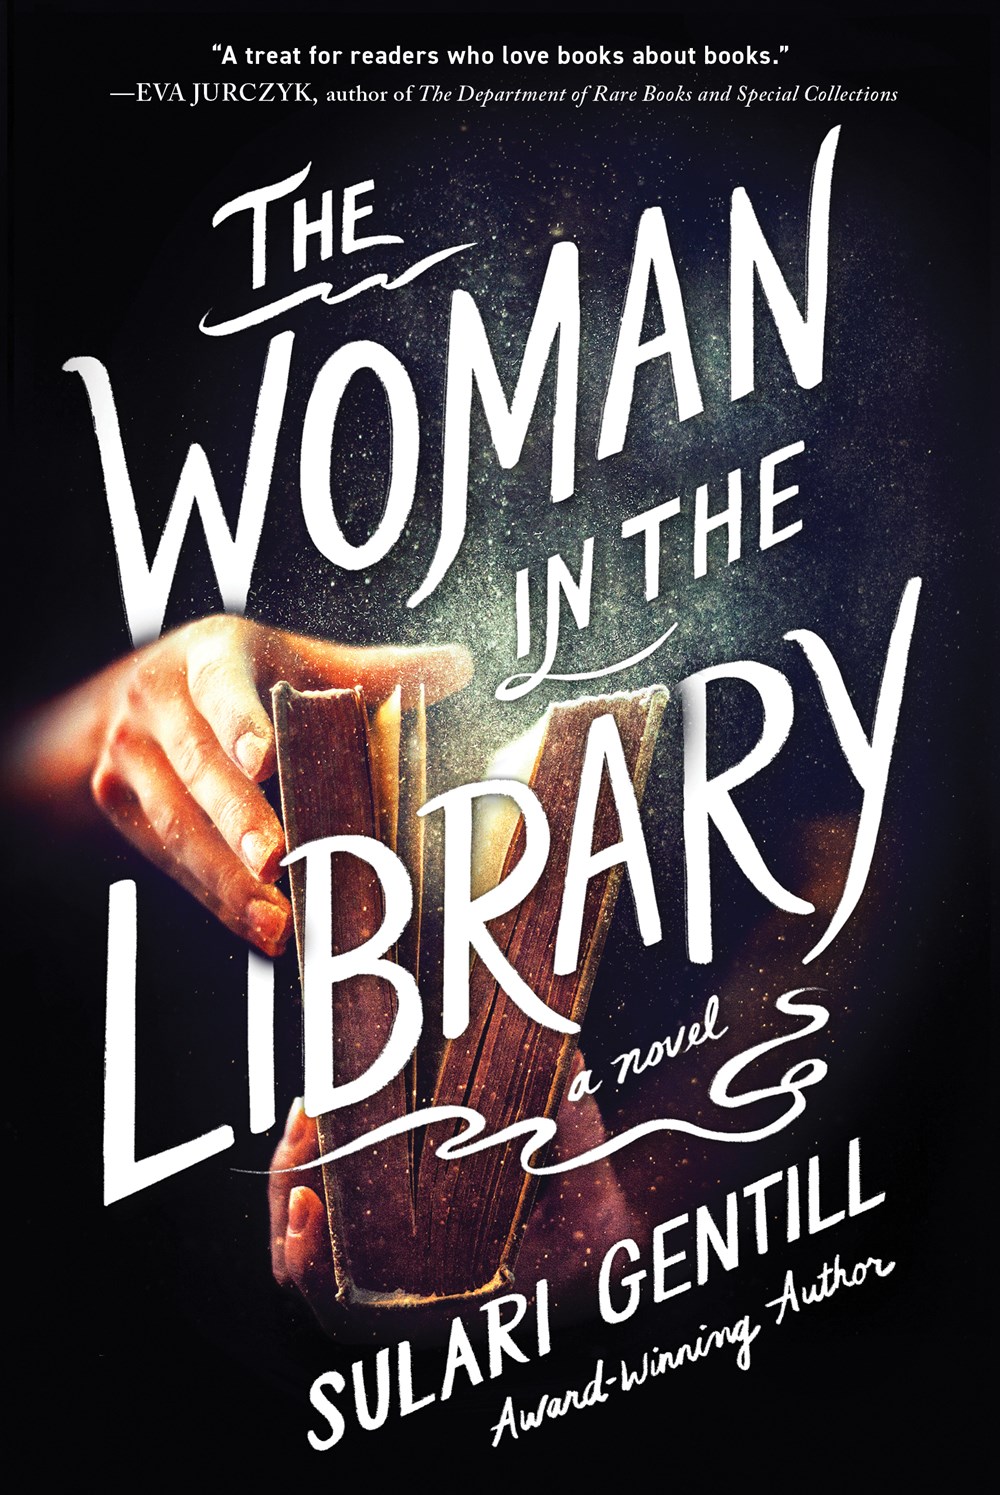 Graphic image of the book cover for The Woman in the Library